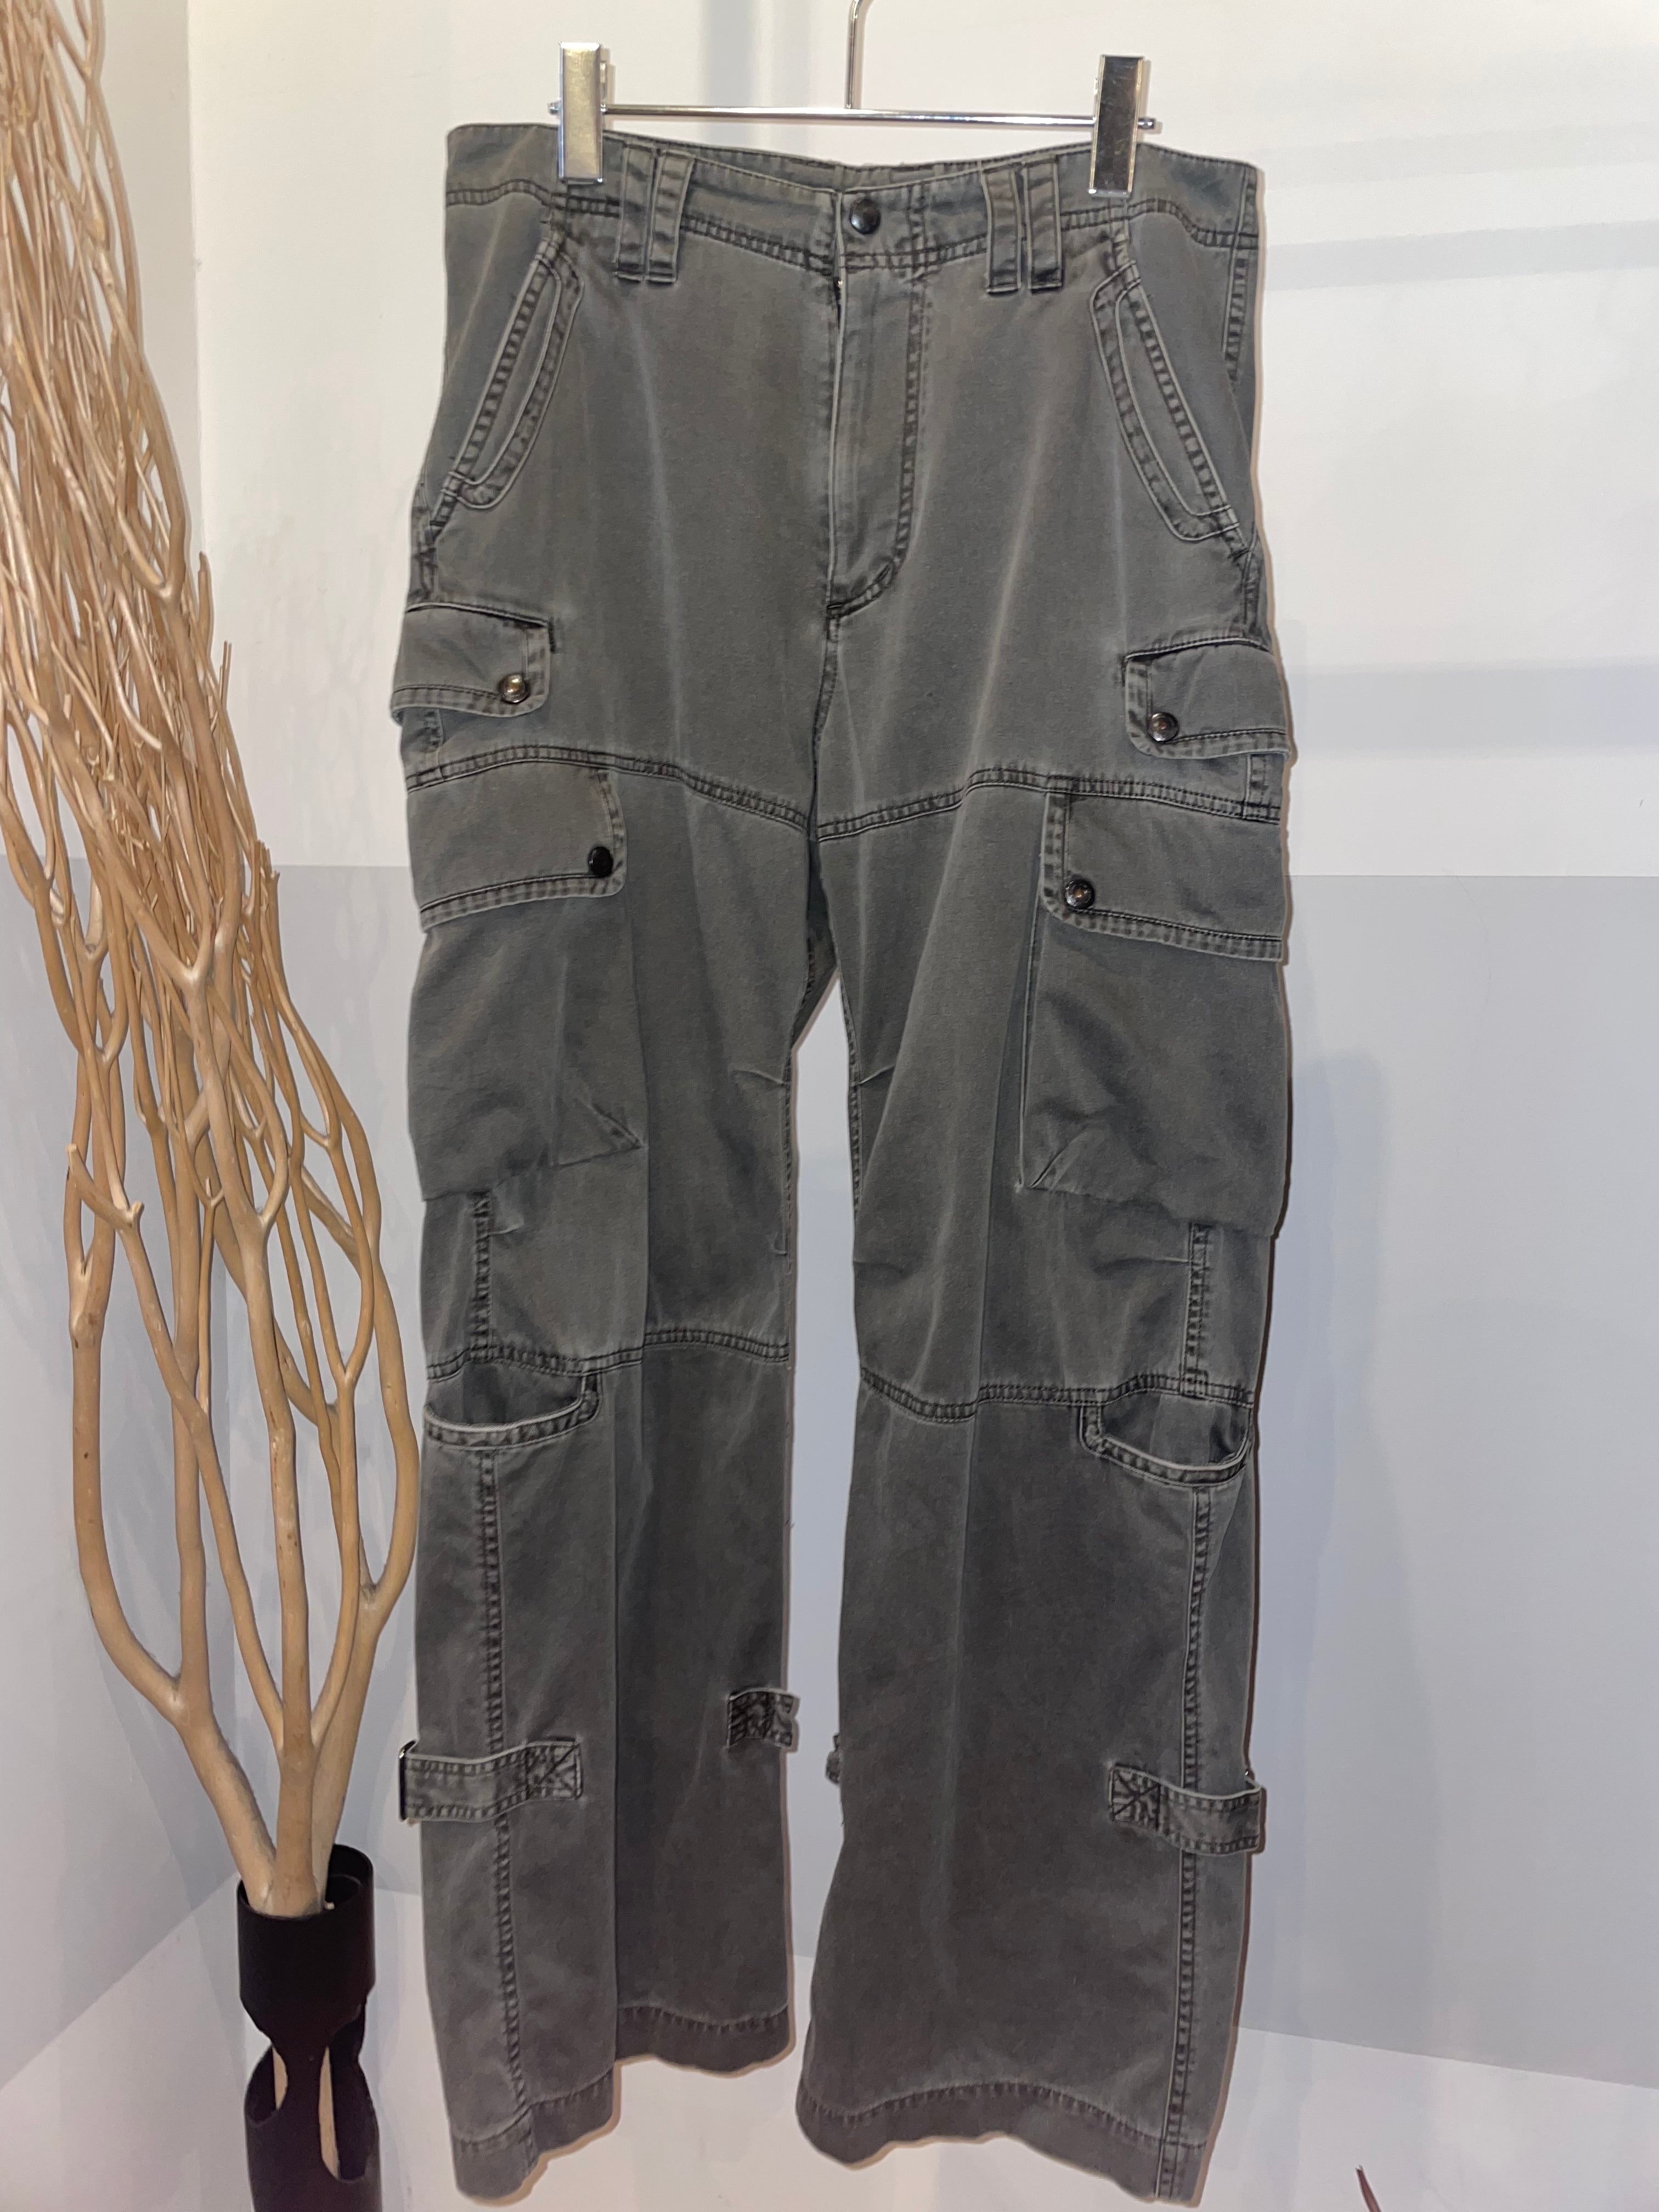 2000s tete homme gimmick cargo pants渡り幅C - ワークパンツ/カーゴ 